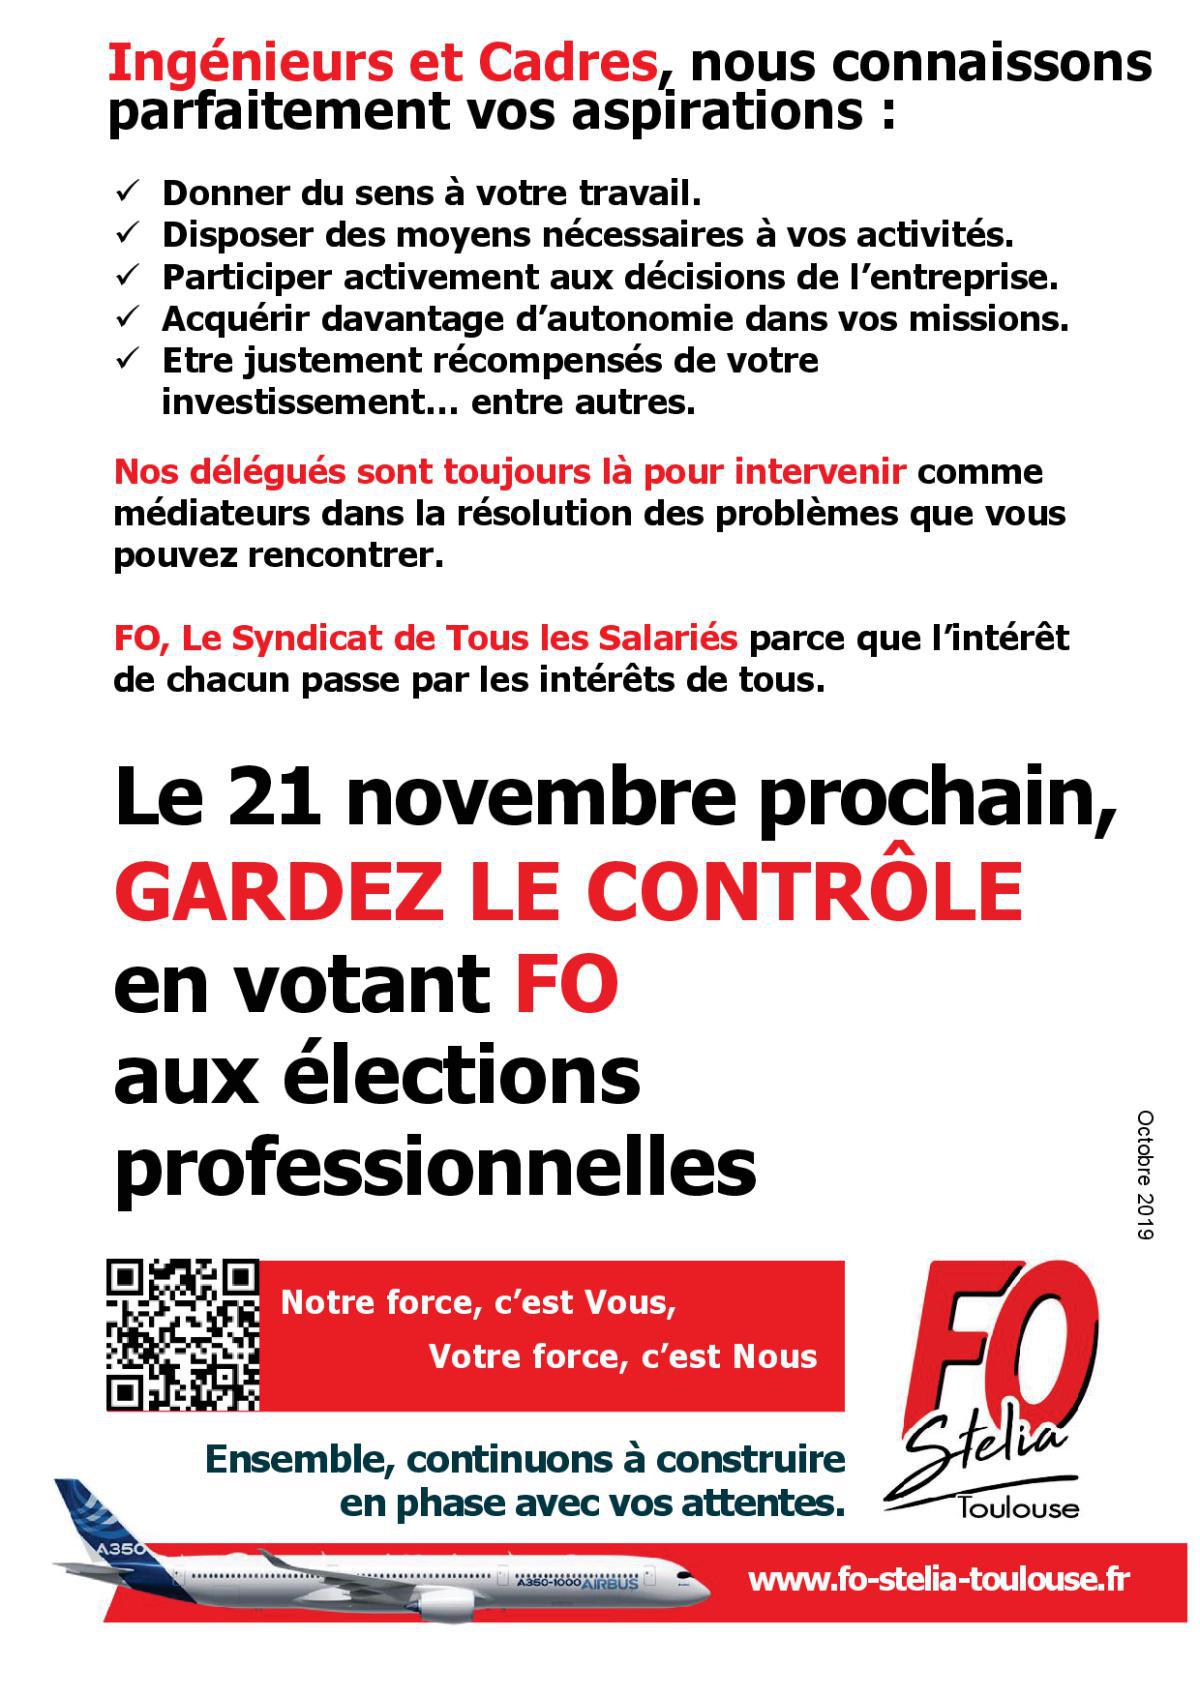 FO, VOTEE FORCE Cadres N°8